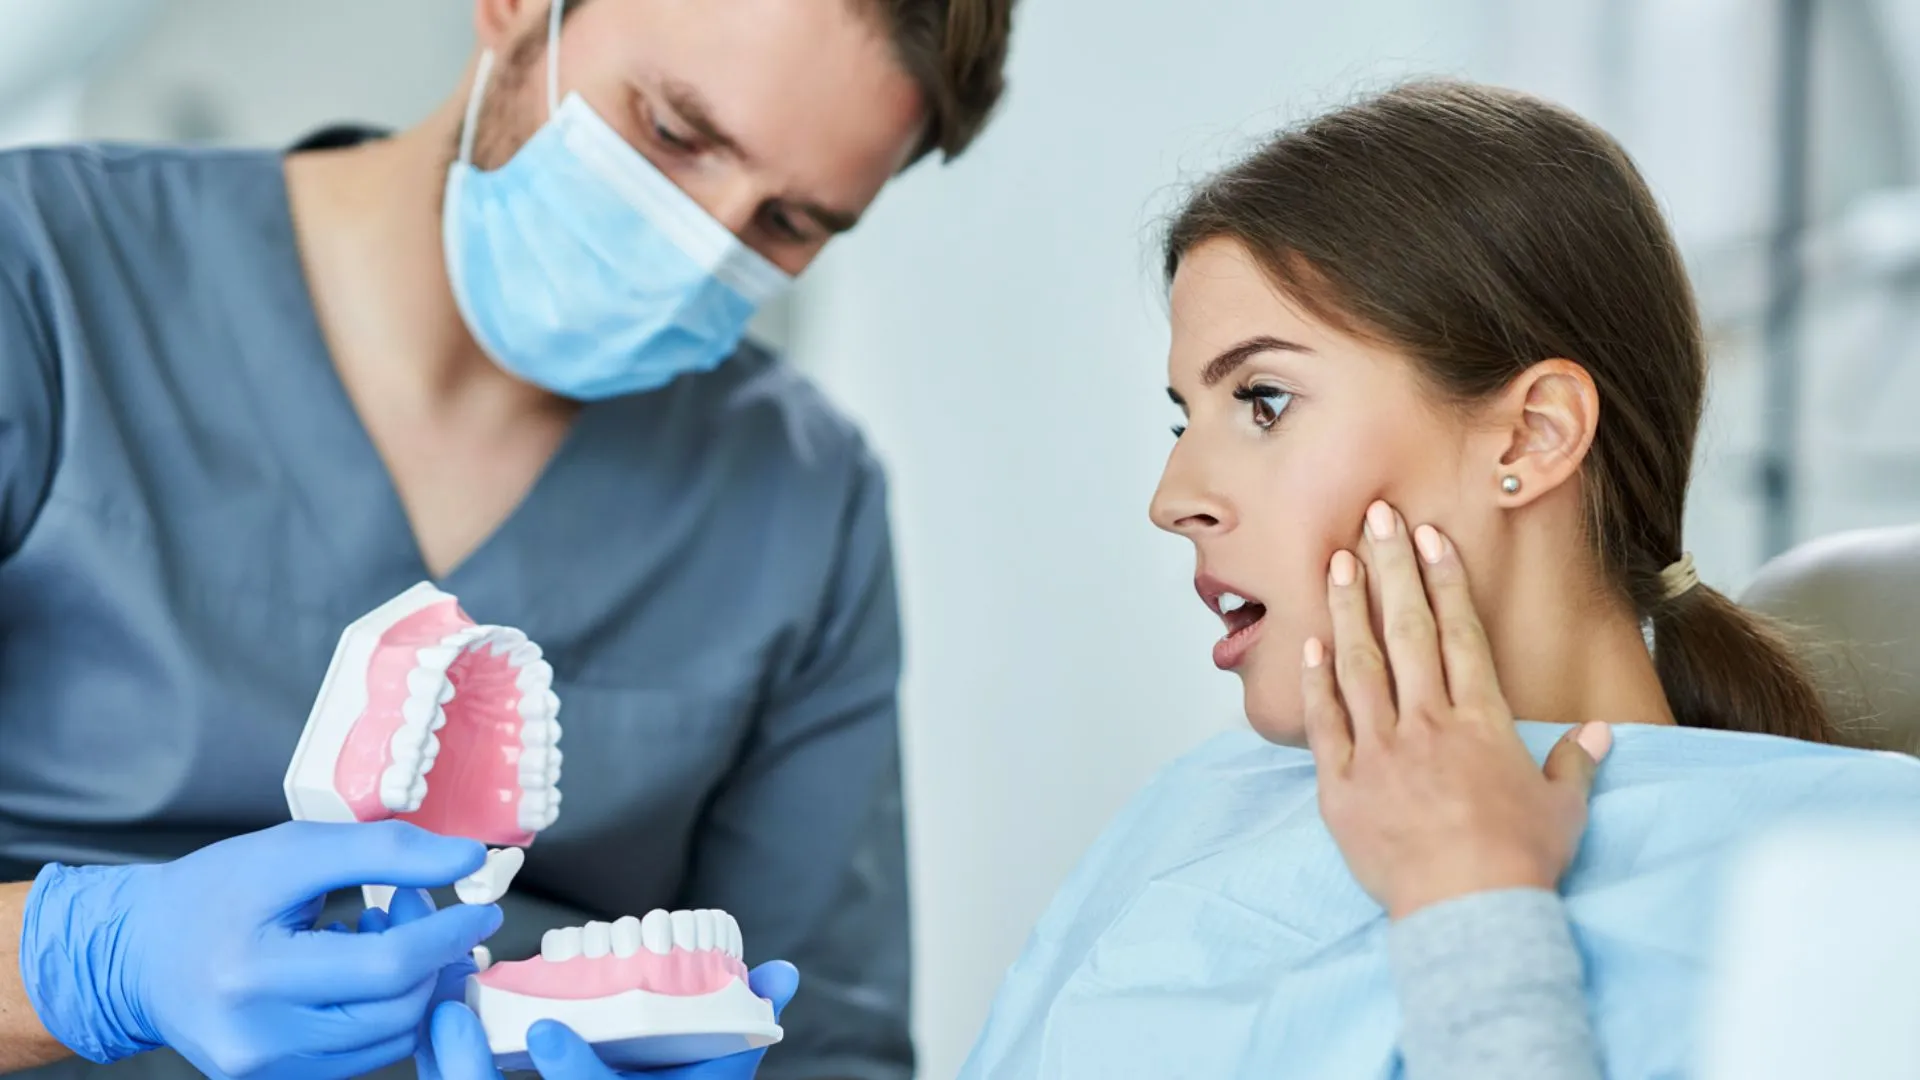 How Painful Are Dental Implants